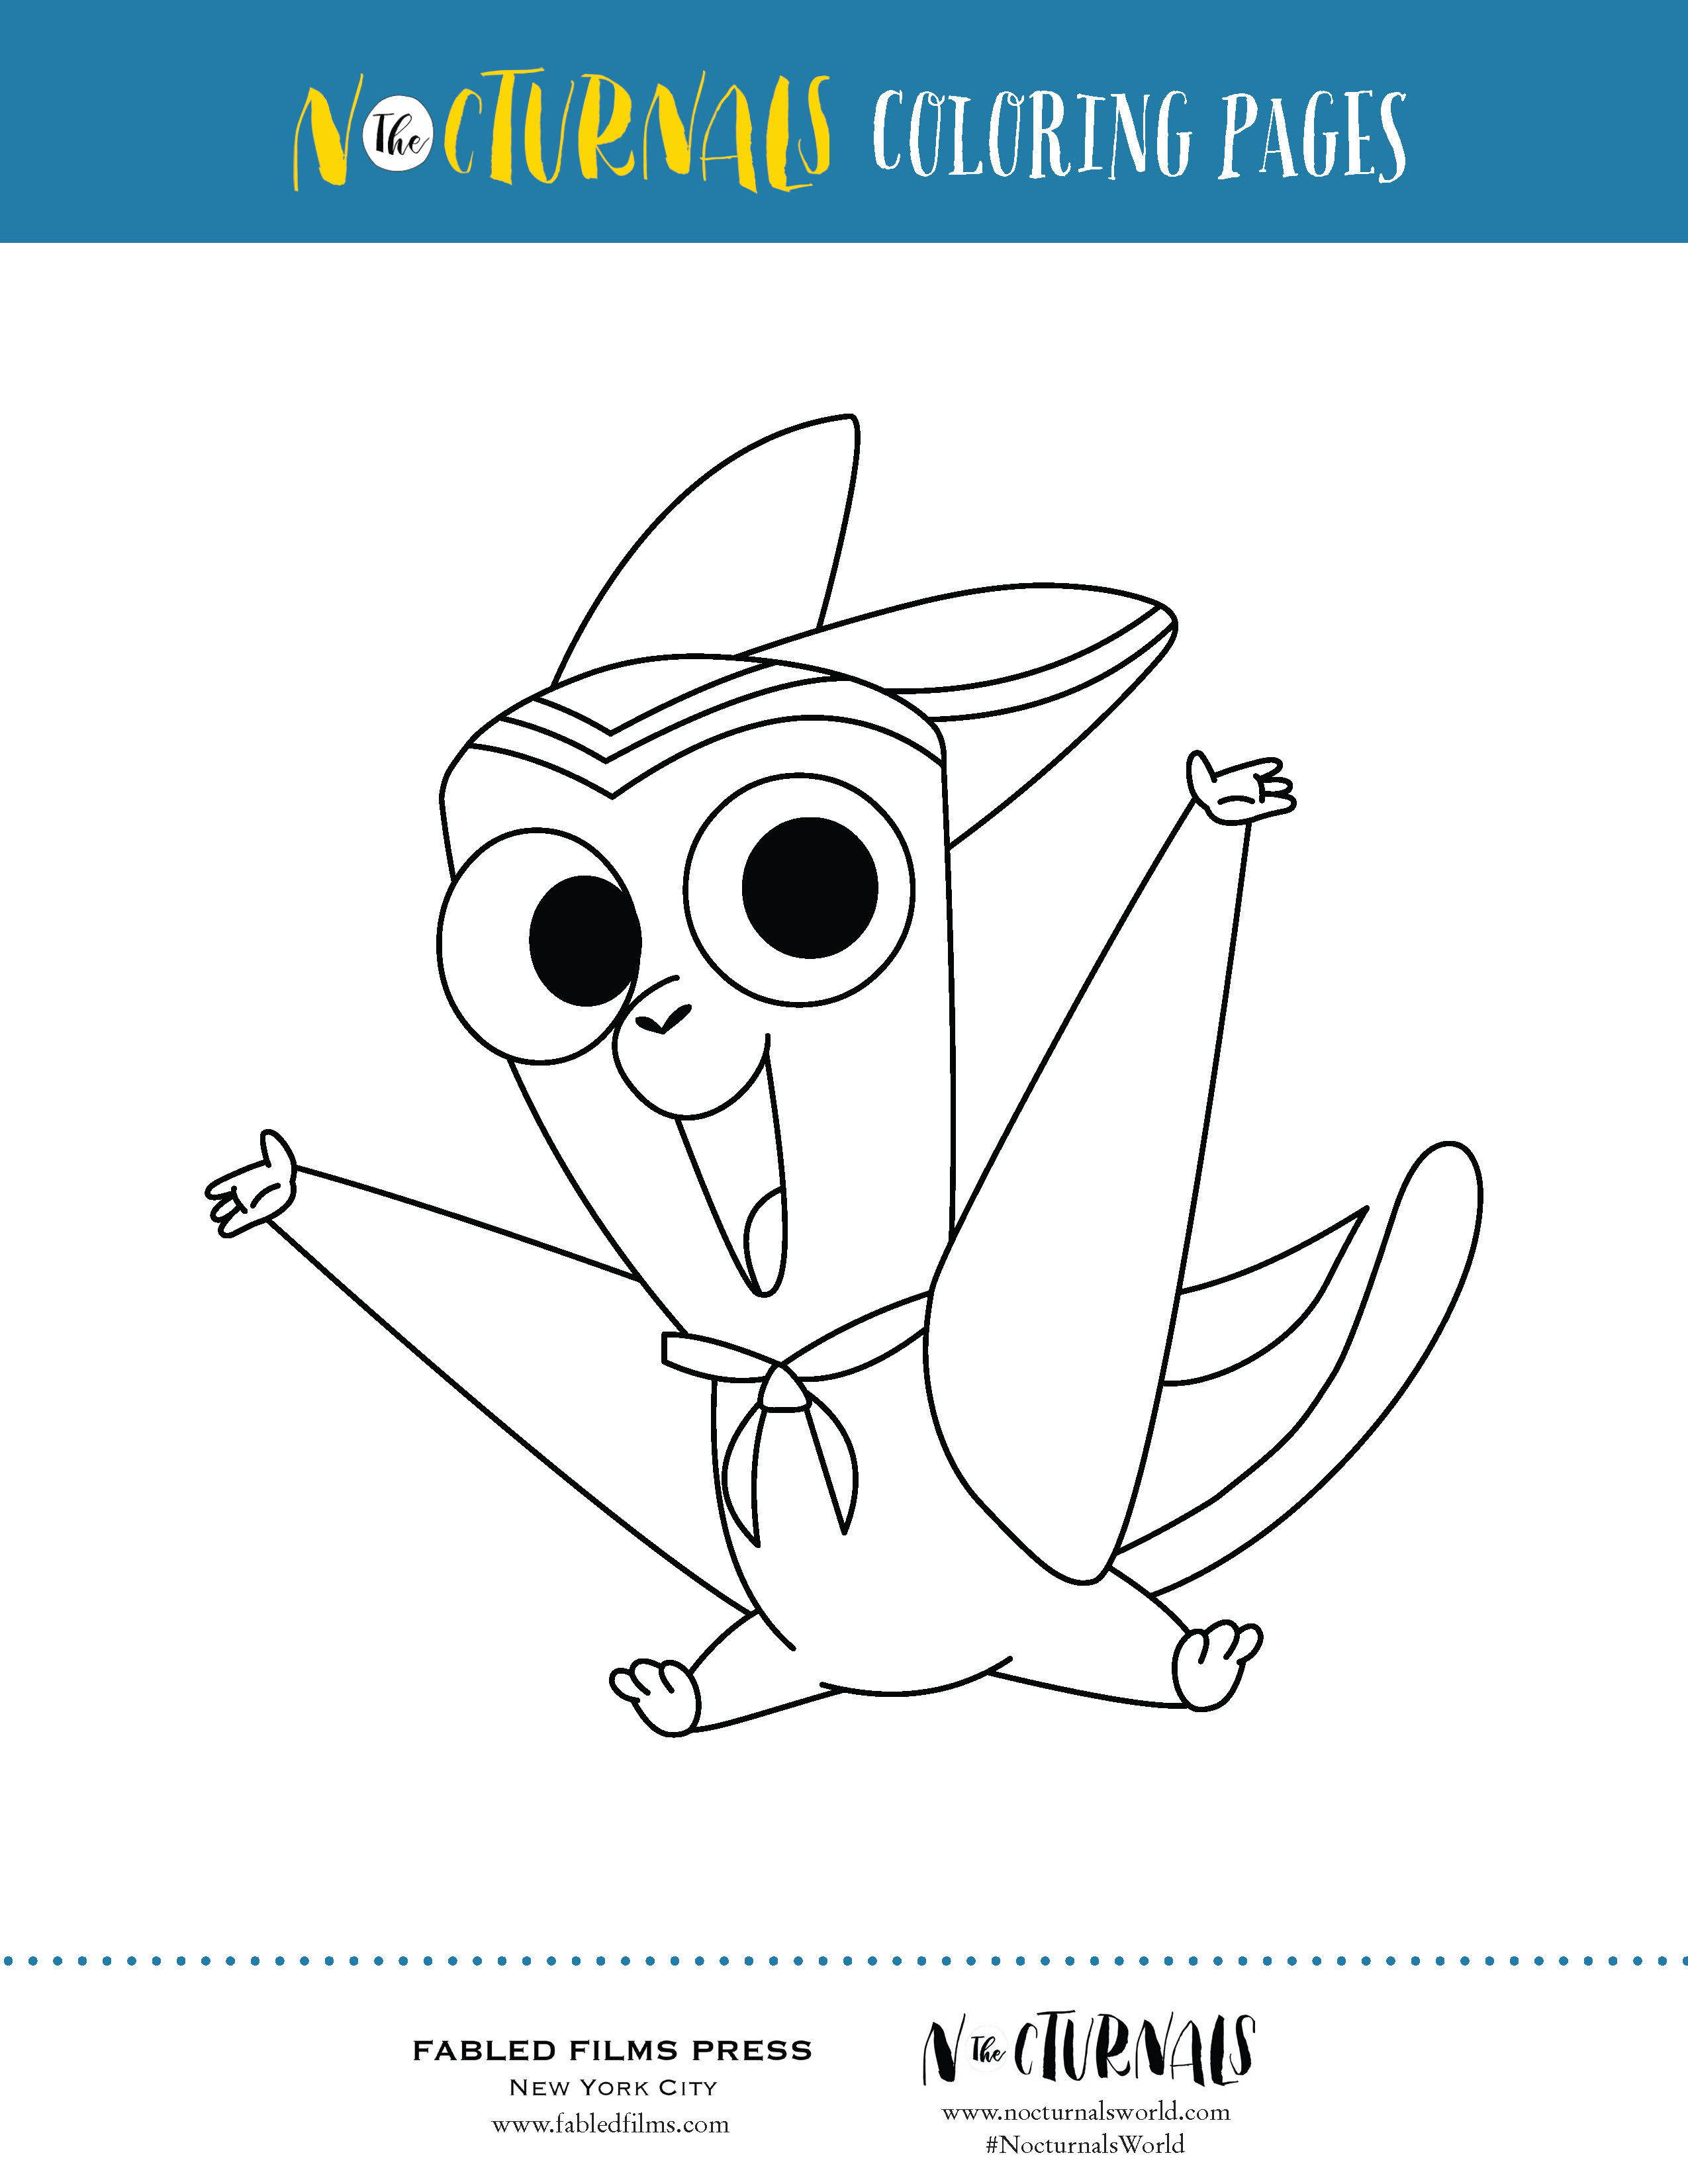 This image shows a preview of The Nocturnals Coloring Pages pdf where Bismark, a sugar glider, has his hands stretched out and a smile on his face. 